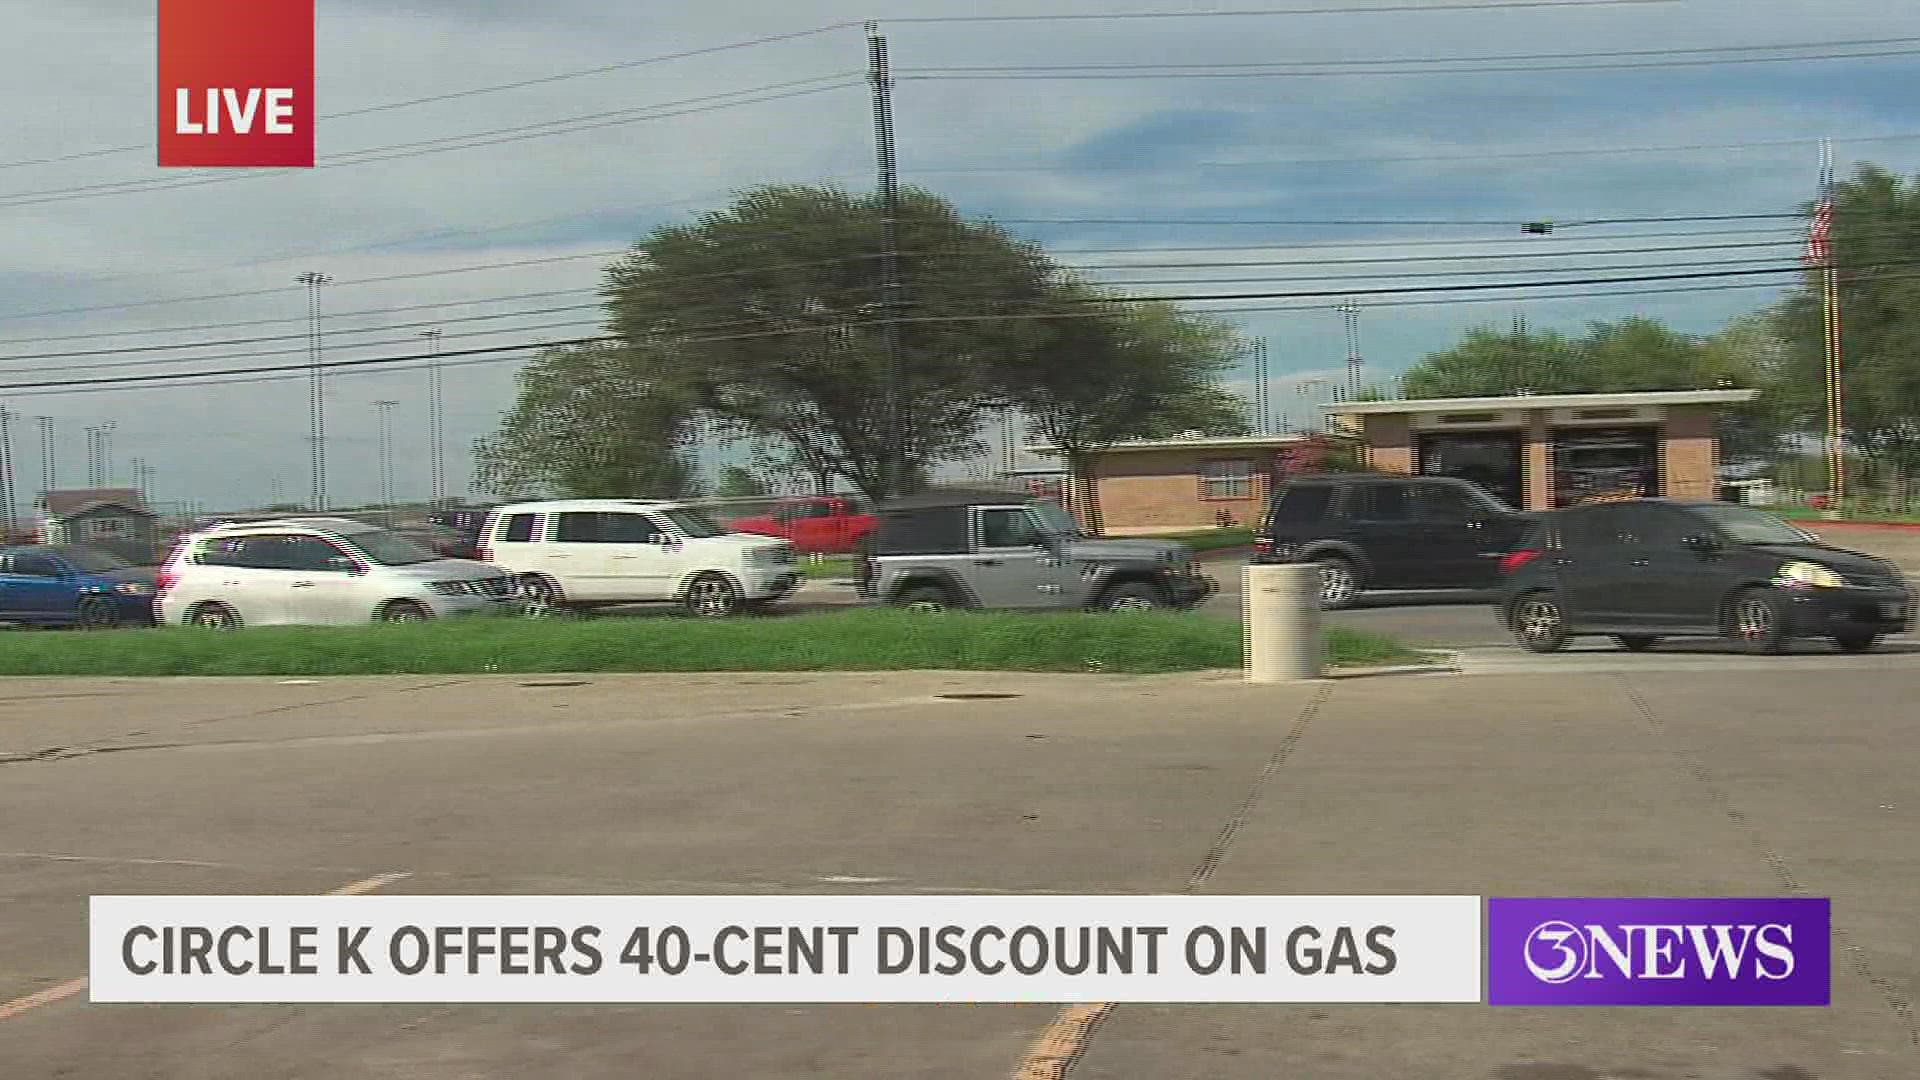 From 4 to 7 p.m., participating Circle K stores across the country will be offering a nice discount on fuel.